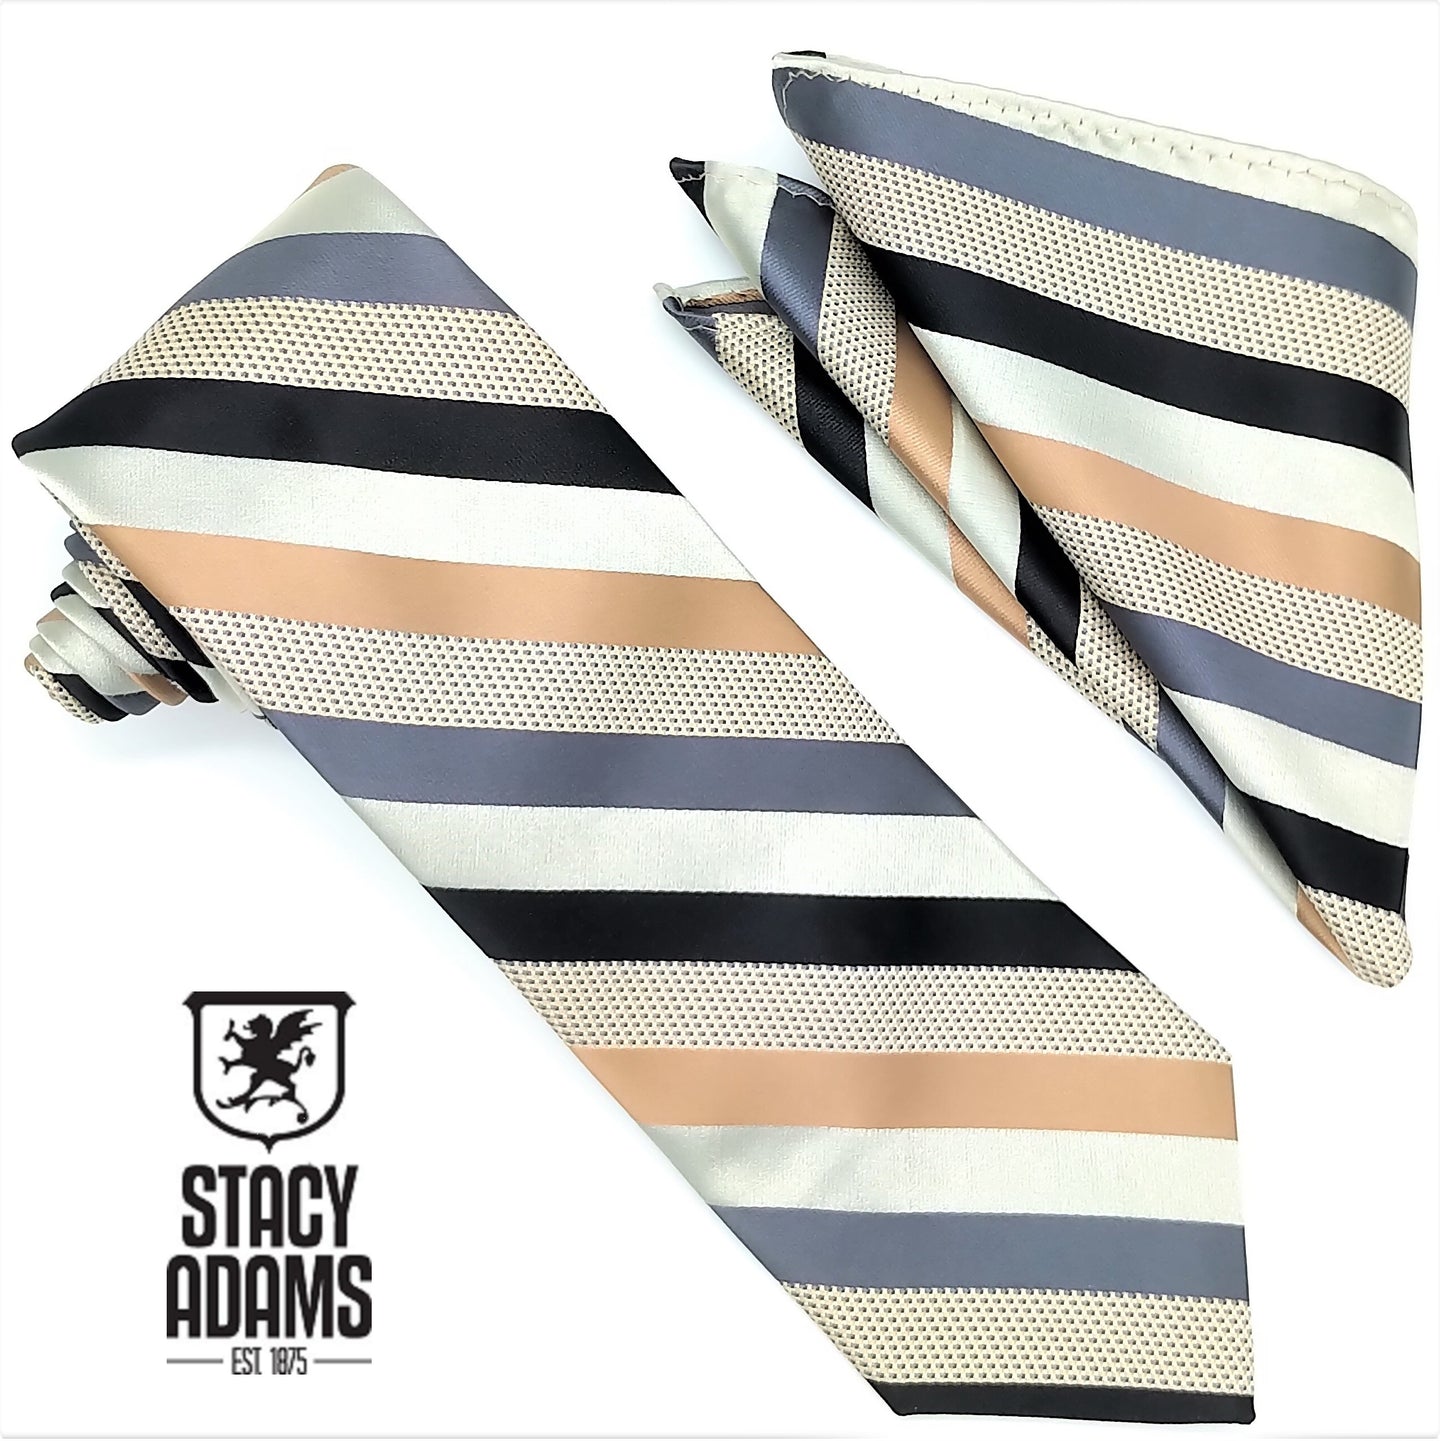 Striped Tie and Hanky Set